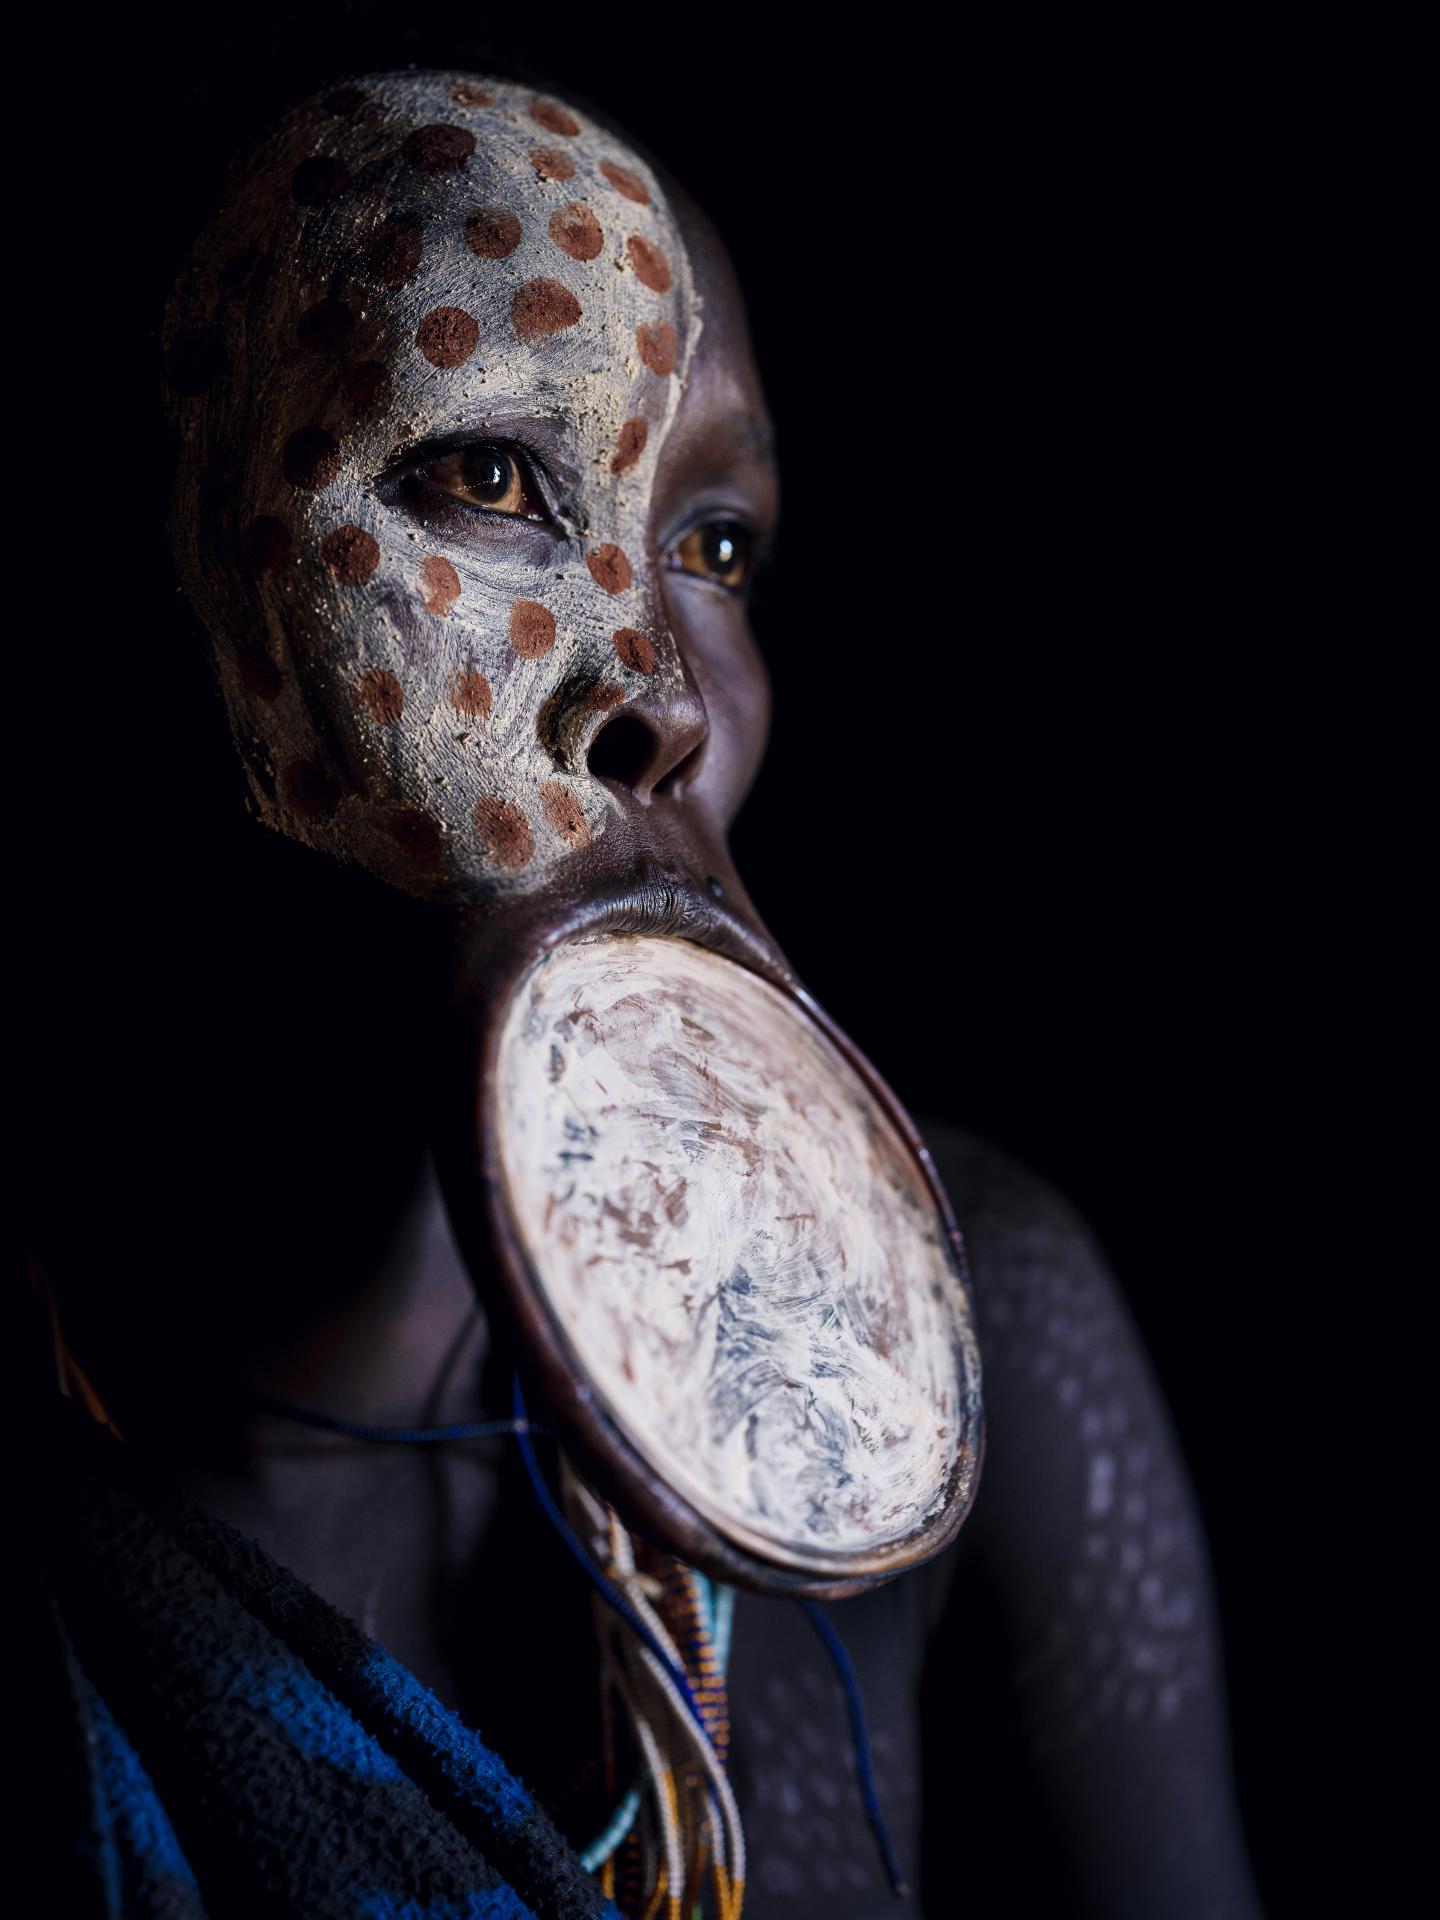 London Photography Awards Winner - Proud Woman of the Omo Valley